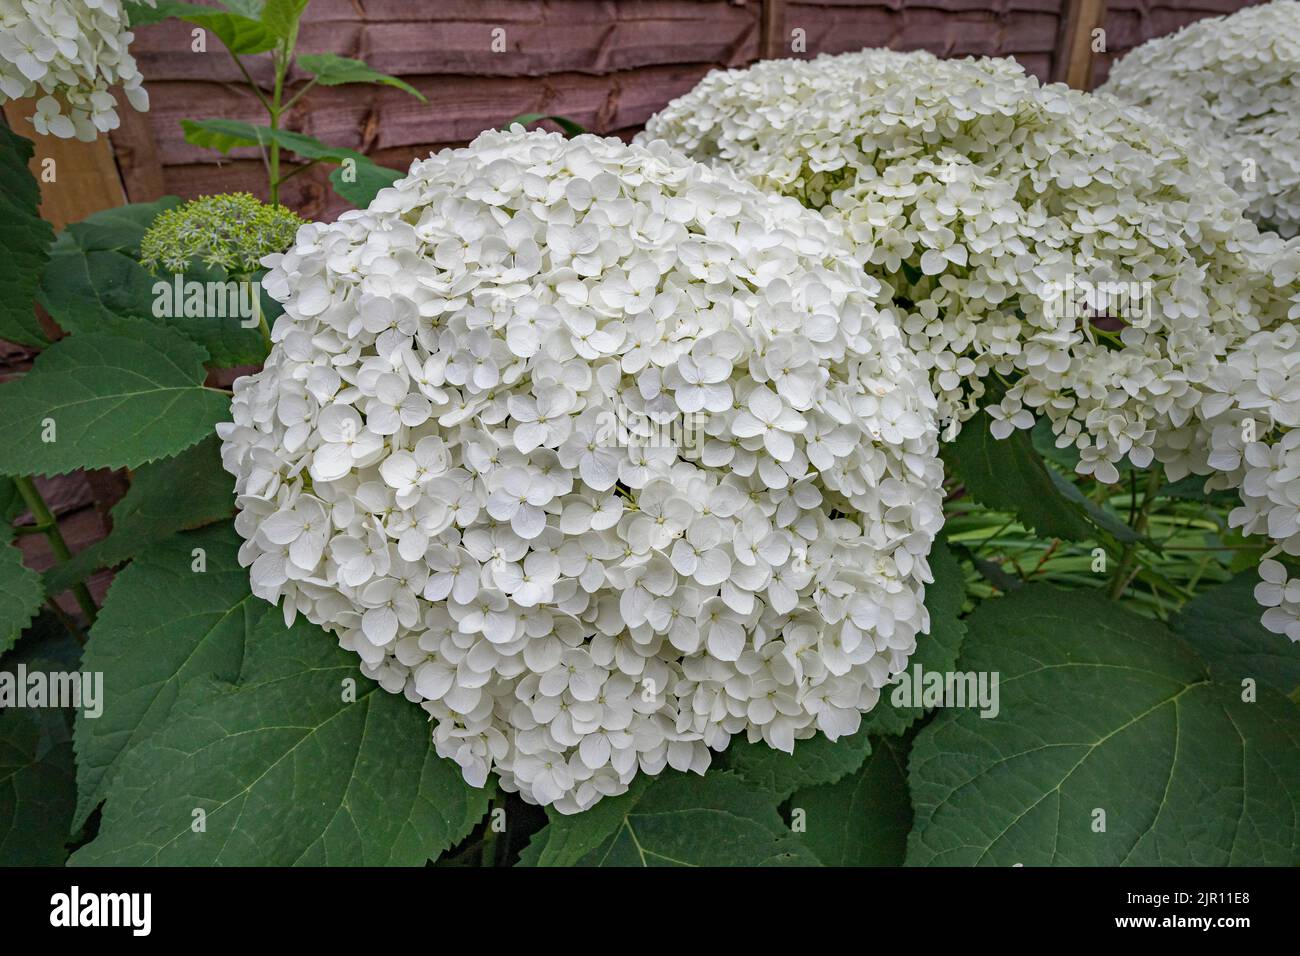 Hydrangea arborescens Annabelle, a large bushy North American shrub , which produces very large, spherical heads of white sterile flowers in summer Stock Photo